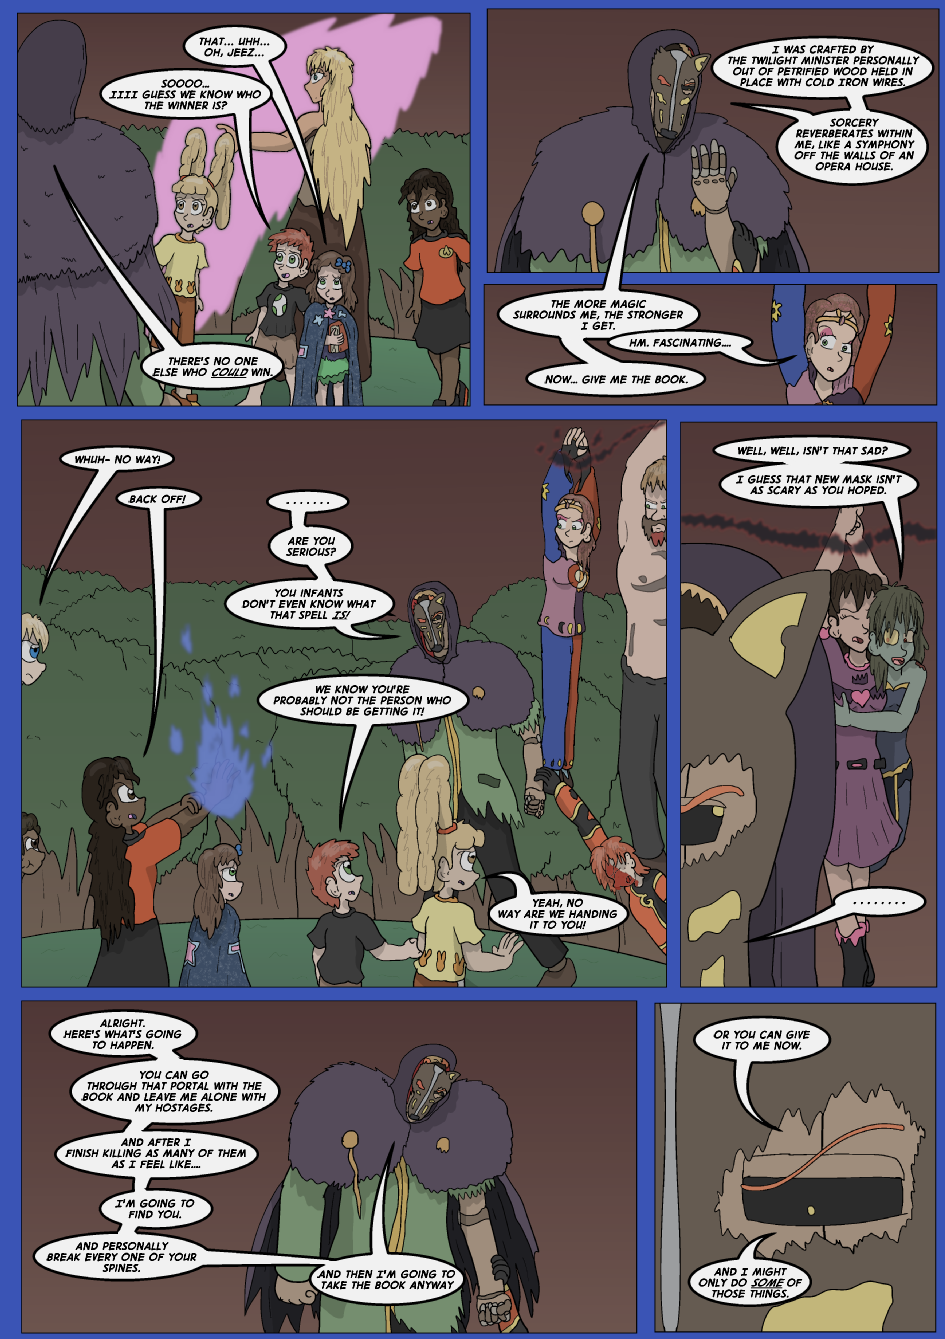 The Lost Spell of Baron Fontainebleu, Page 26